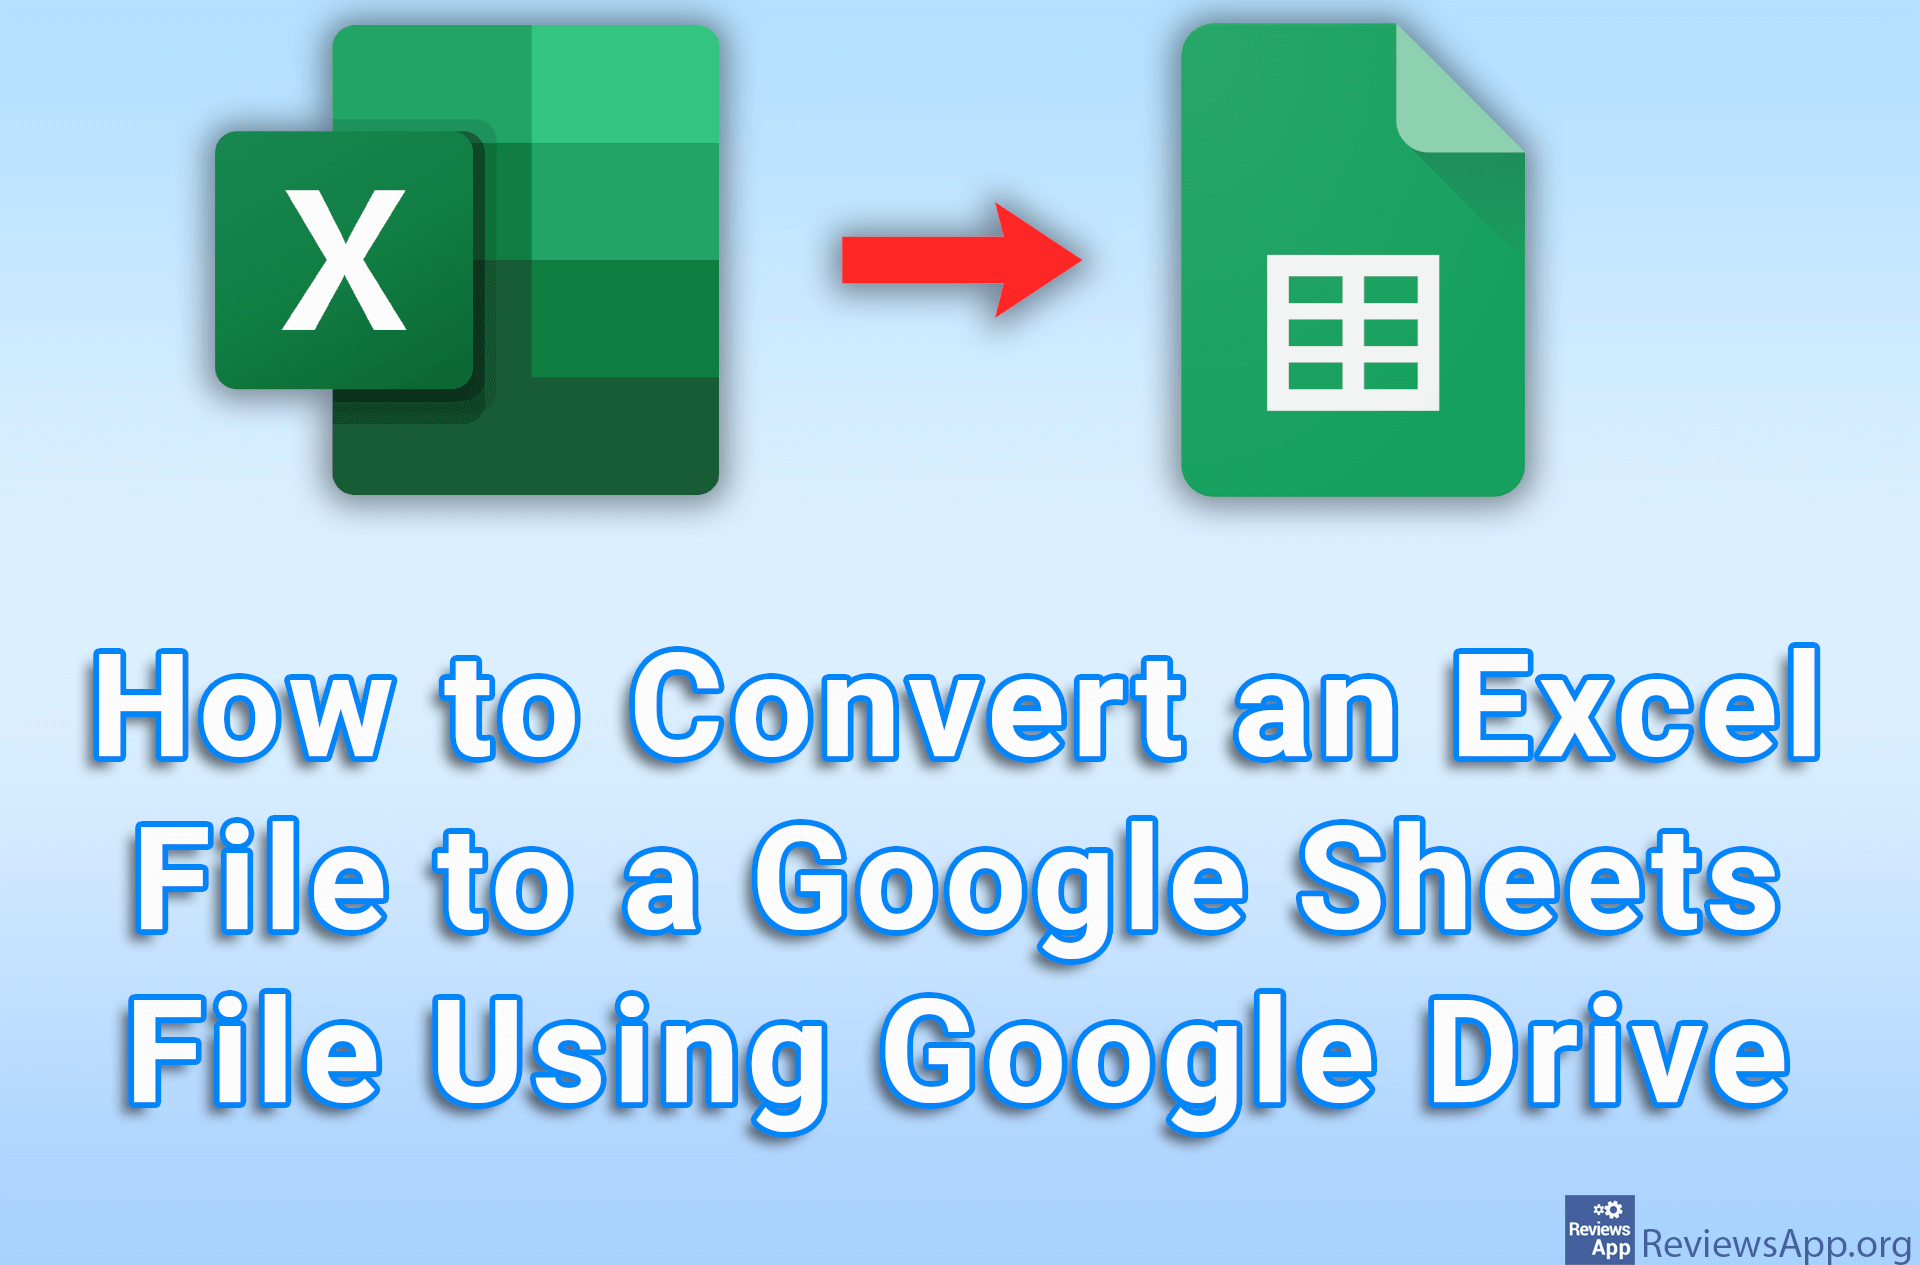 How to Convert an Excel File to a Google Sheets File Using Google Drive